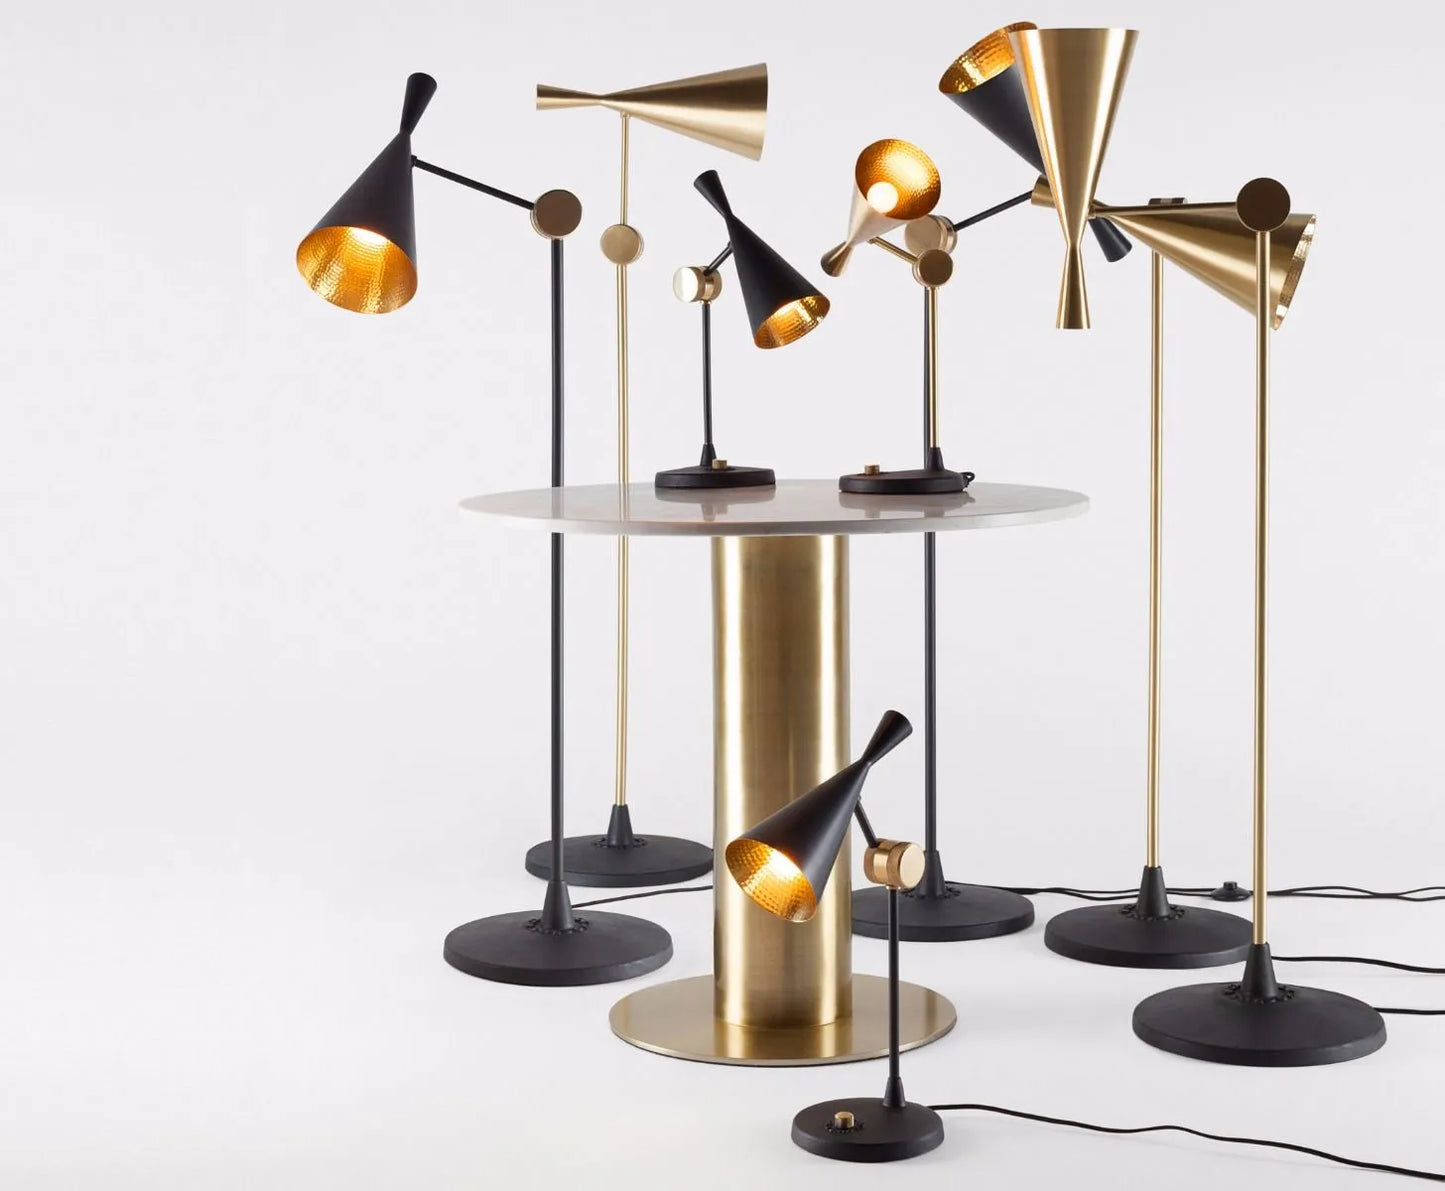 Completely Adjustable Modern table floor lamps with Indian hammered brass texture